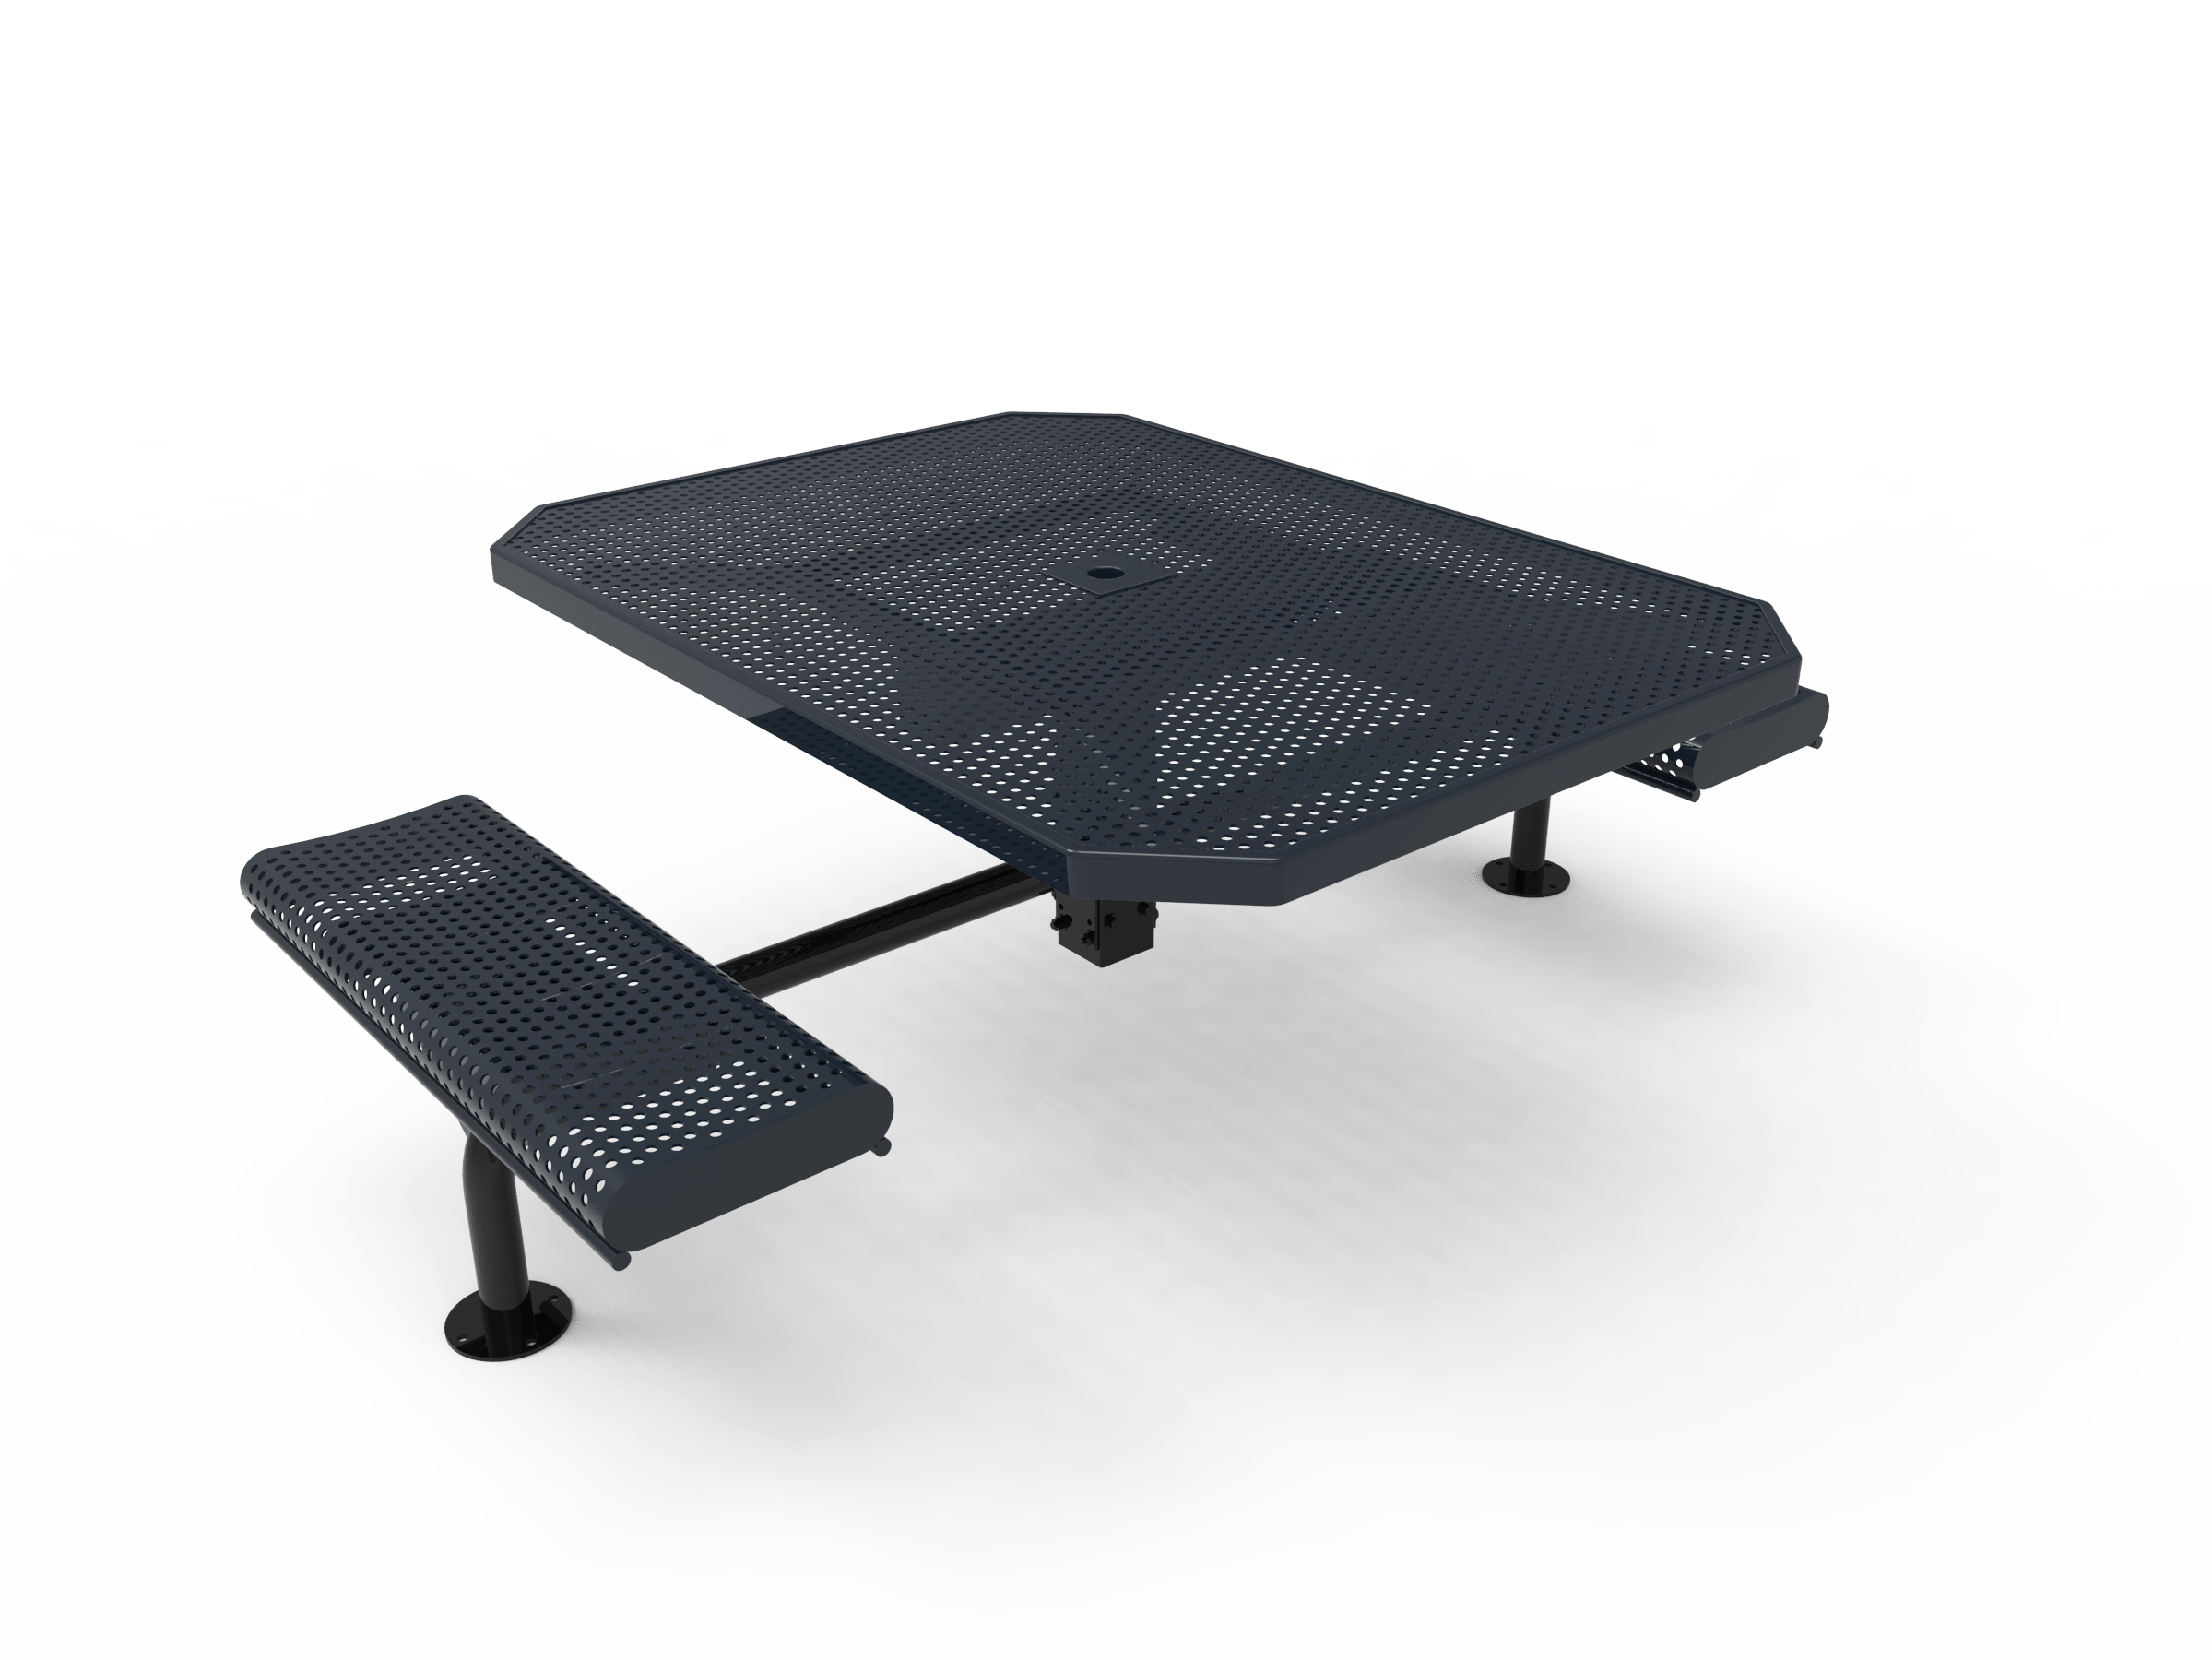 46″ Oct Nexus Surface Table With 2 Rolled Seats-Punched
TOR46-D-52-012
Industry Standard Finish
$1869.00
TOR46-B-52-012
Advantage Premium Finish
$2329.00
